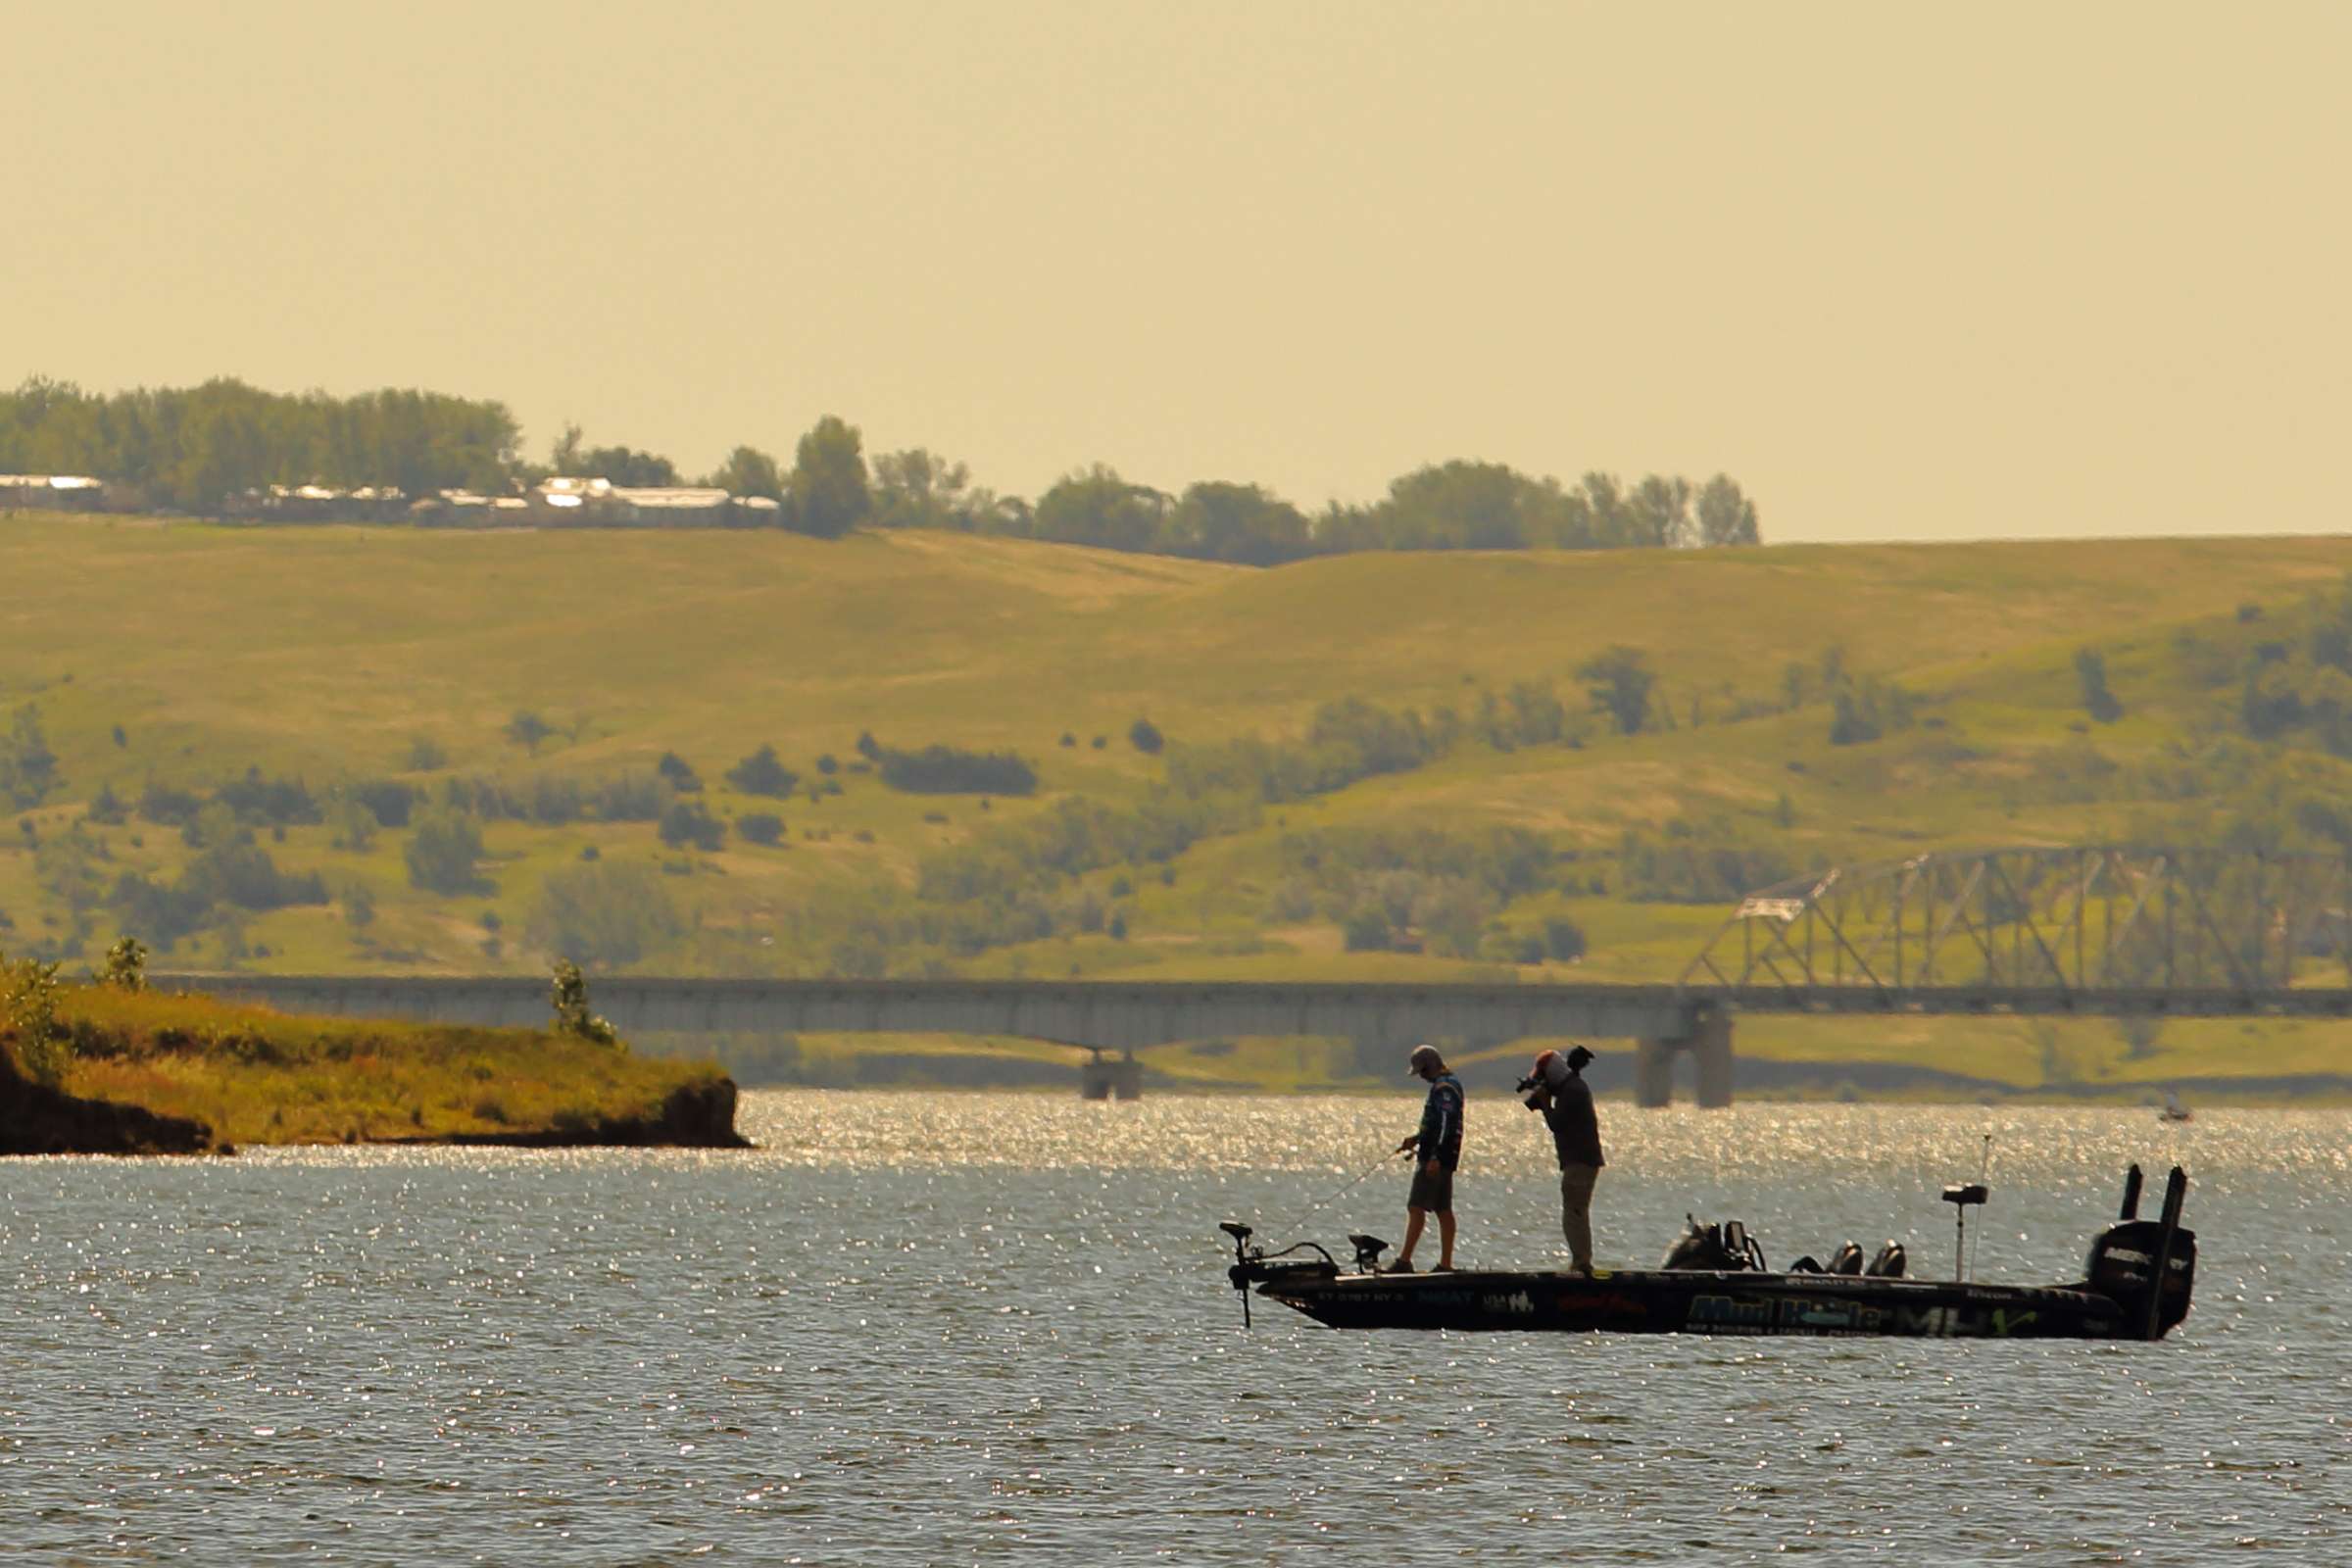 <h4>Codgers Cove RV Park, South Dakota</h4>
Lake Oahe garnered highlight status during the 2018 Bassmaster Elite Series season, and it remains an excellent fishery for anglers in search of adventure. Codgers Cove RV Park lies on the outskirts of Pierre, S.D. The park offers sublime sunset views over the rolling hills of South Dakota, water and sewage amenities at each lot and access to three nearby boat launches.
